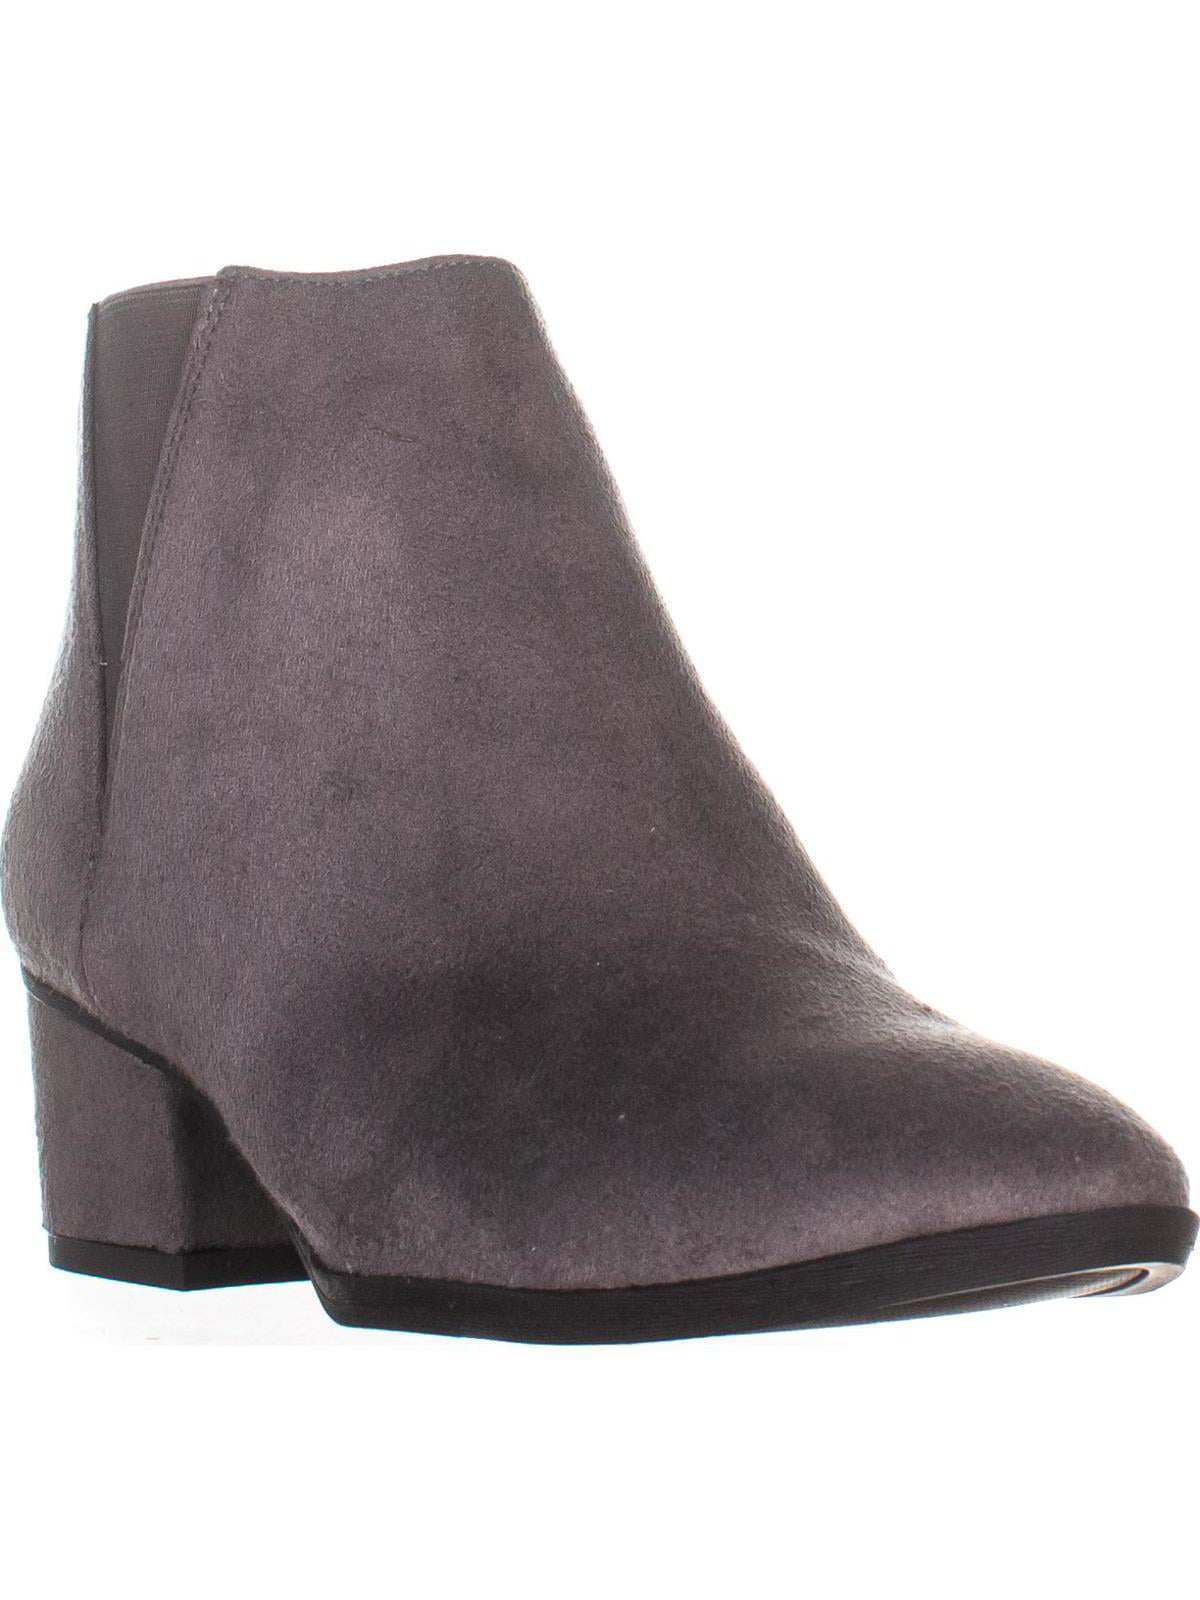 Scholls Shoes Womens Tumbler Ankle Boot Dr